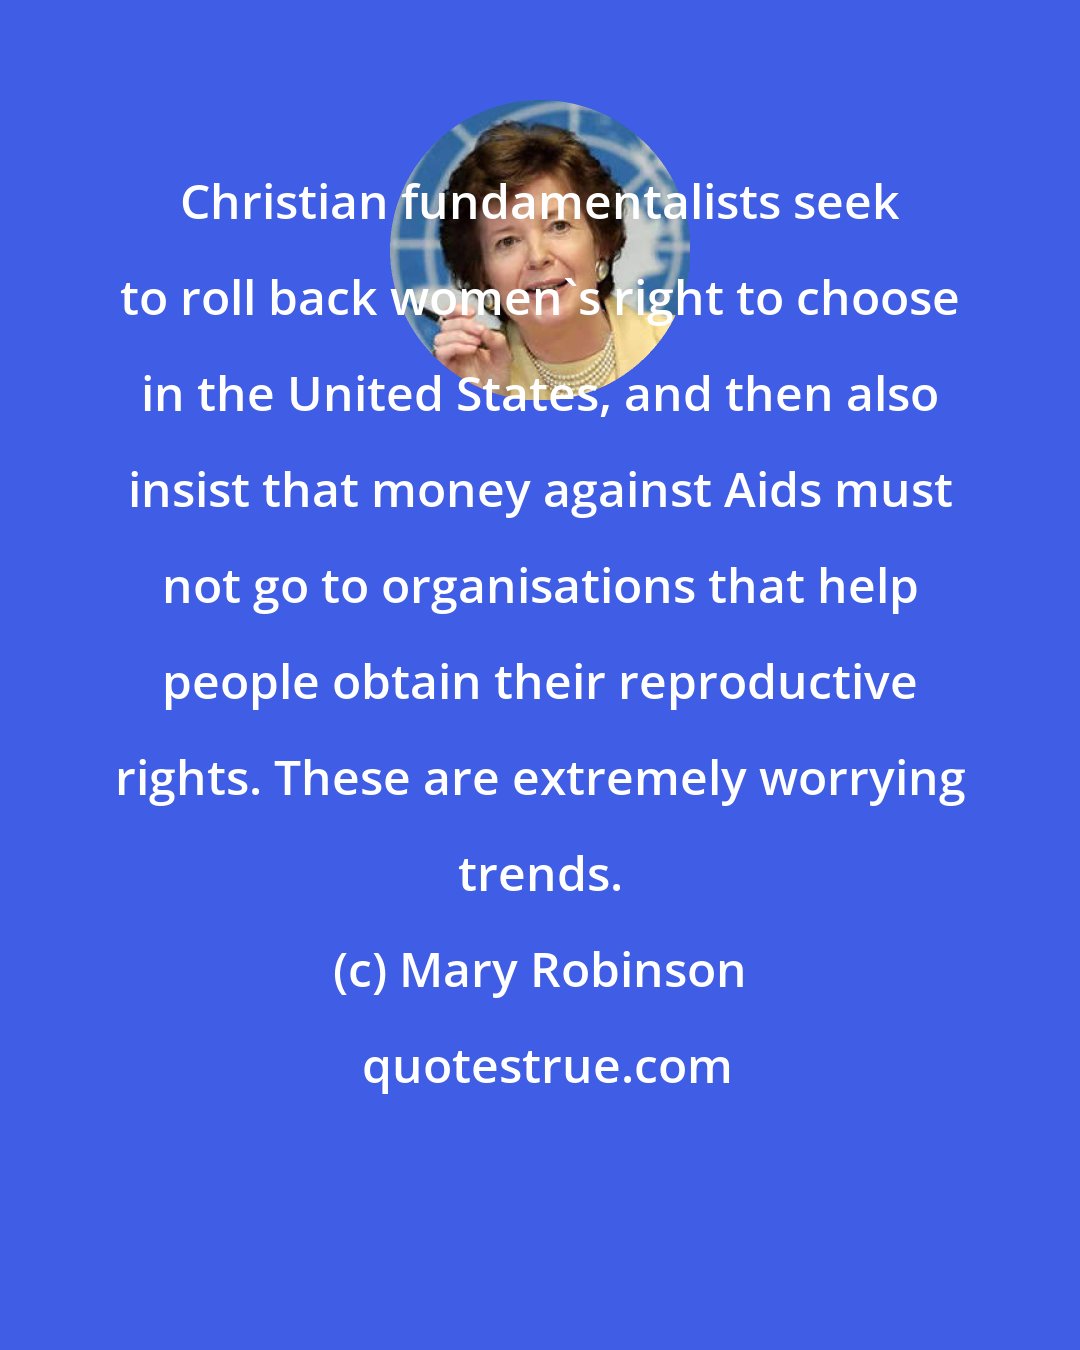 Mary Robinson: Christian fundamentalists seek to roll back women's right to choose in the United States, and then also insist that money against Aids must not go to organisations that help people obtain their reproductive rights. These are extremely worrying trends.